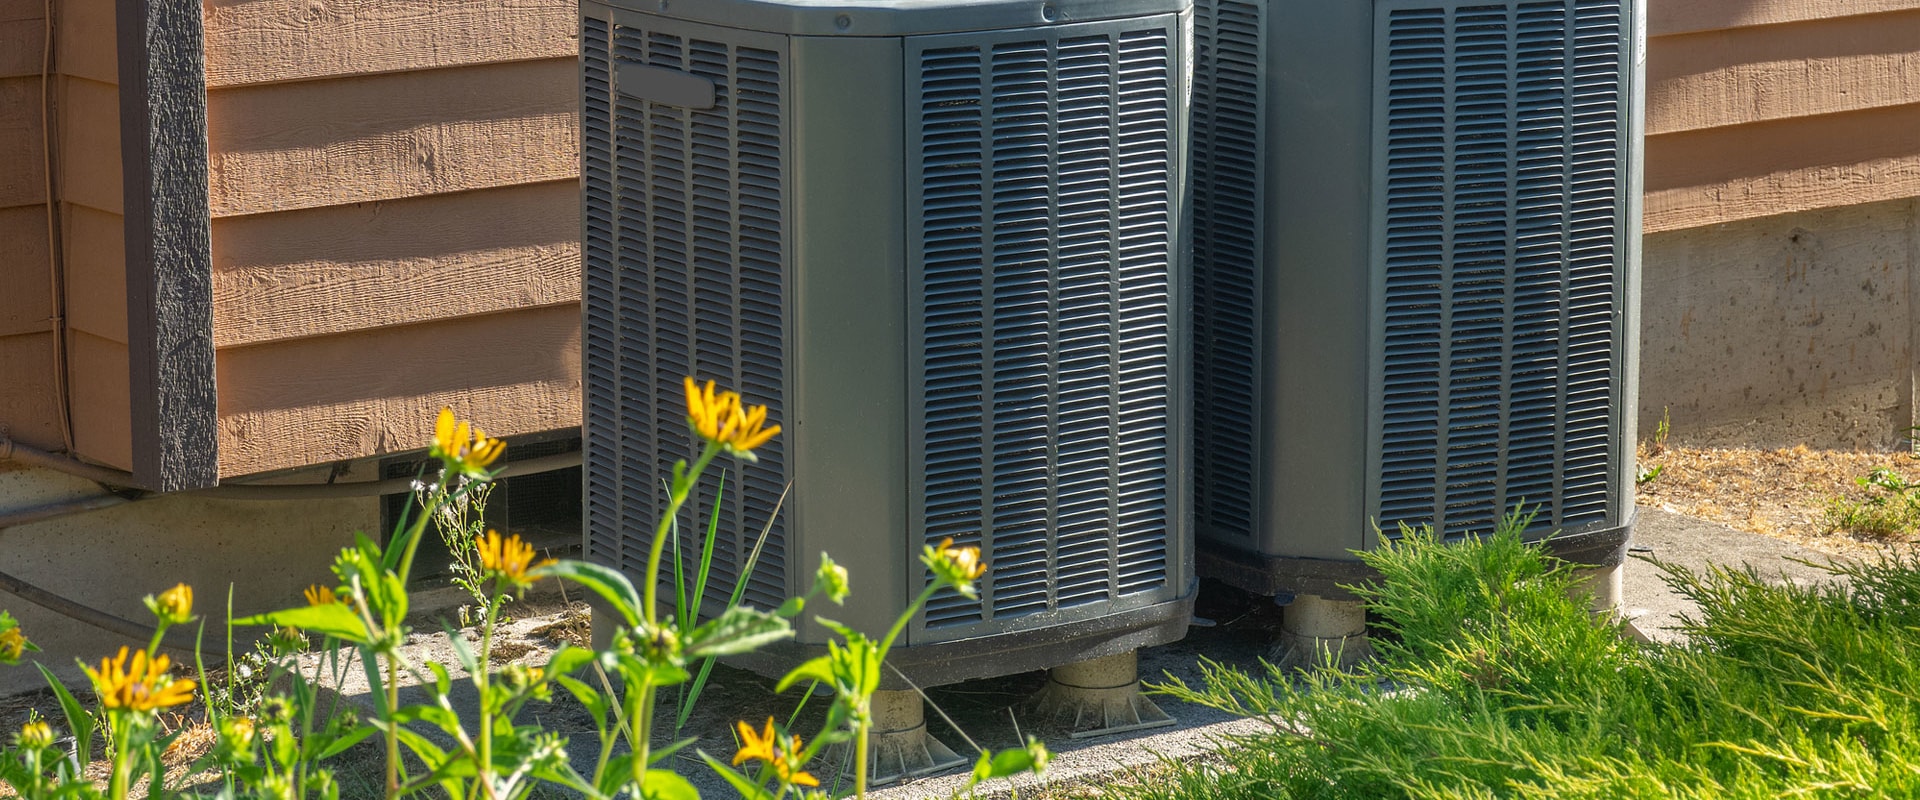 Choosing the Right HVAC System for Home Comfort